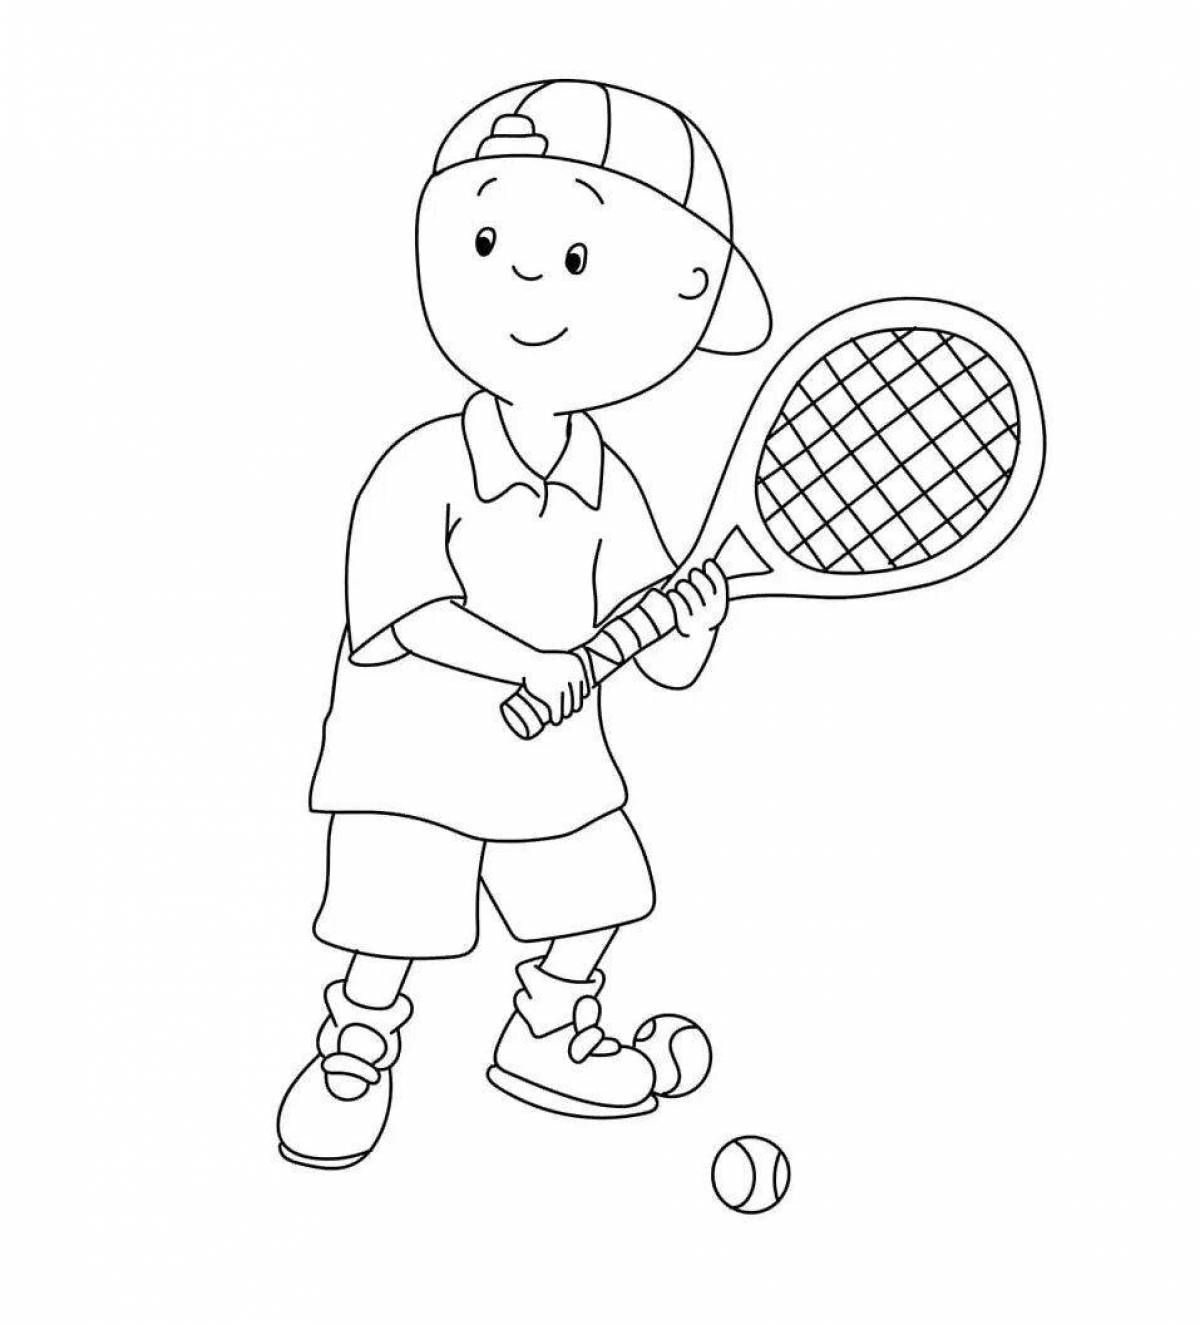 Adorable sports coloring book for 4-5 year olds